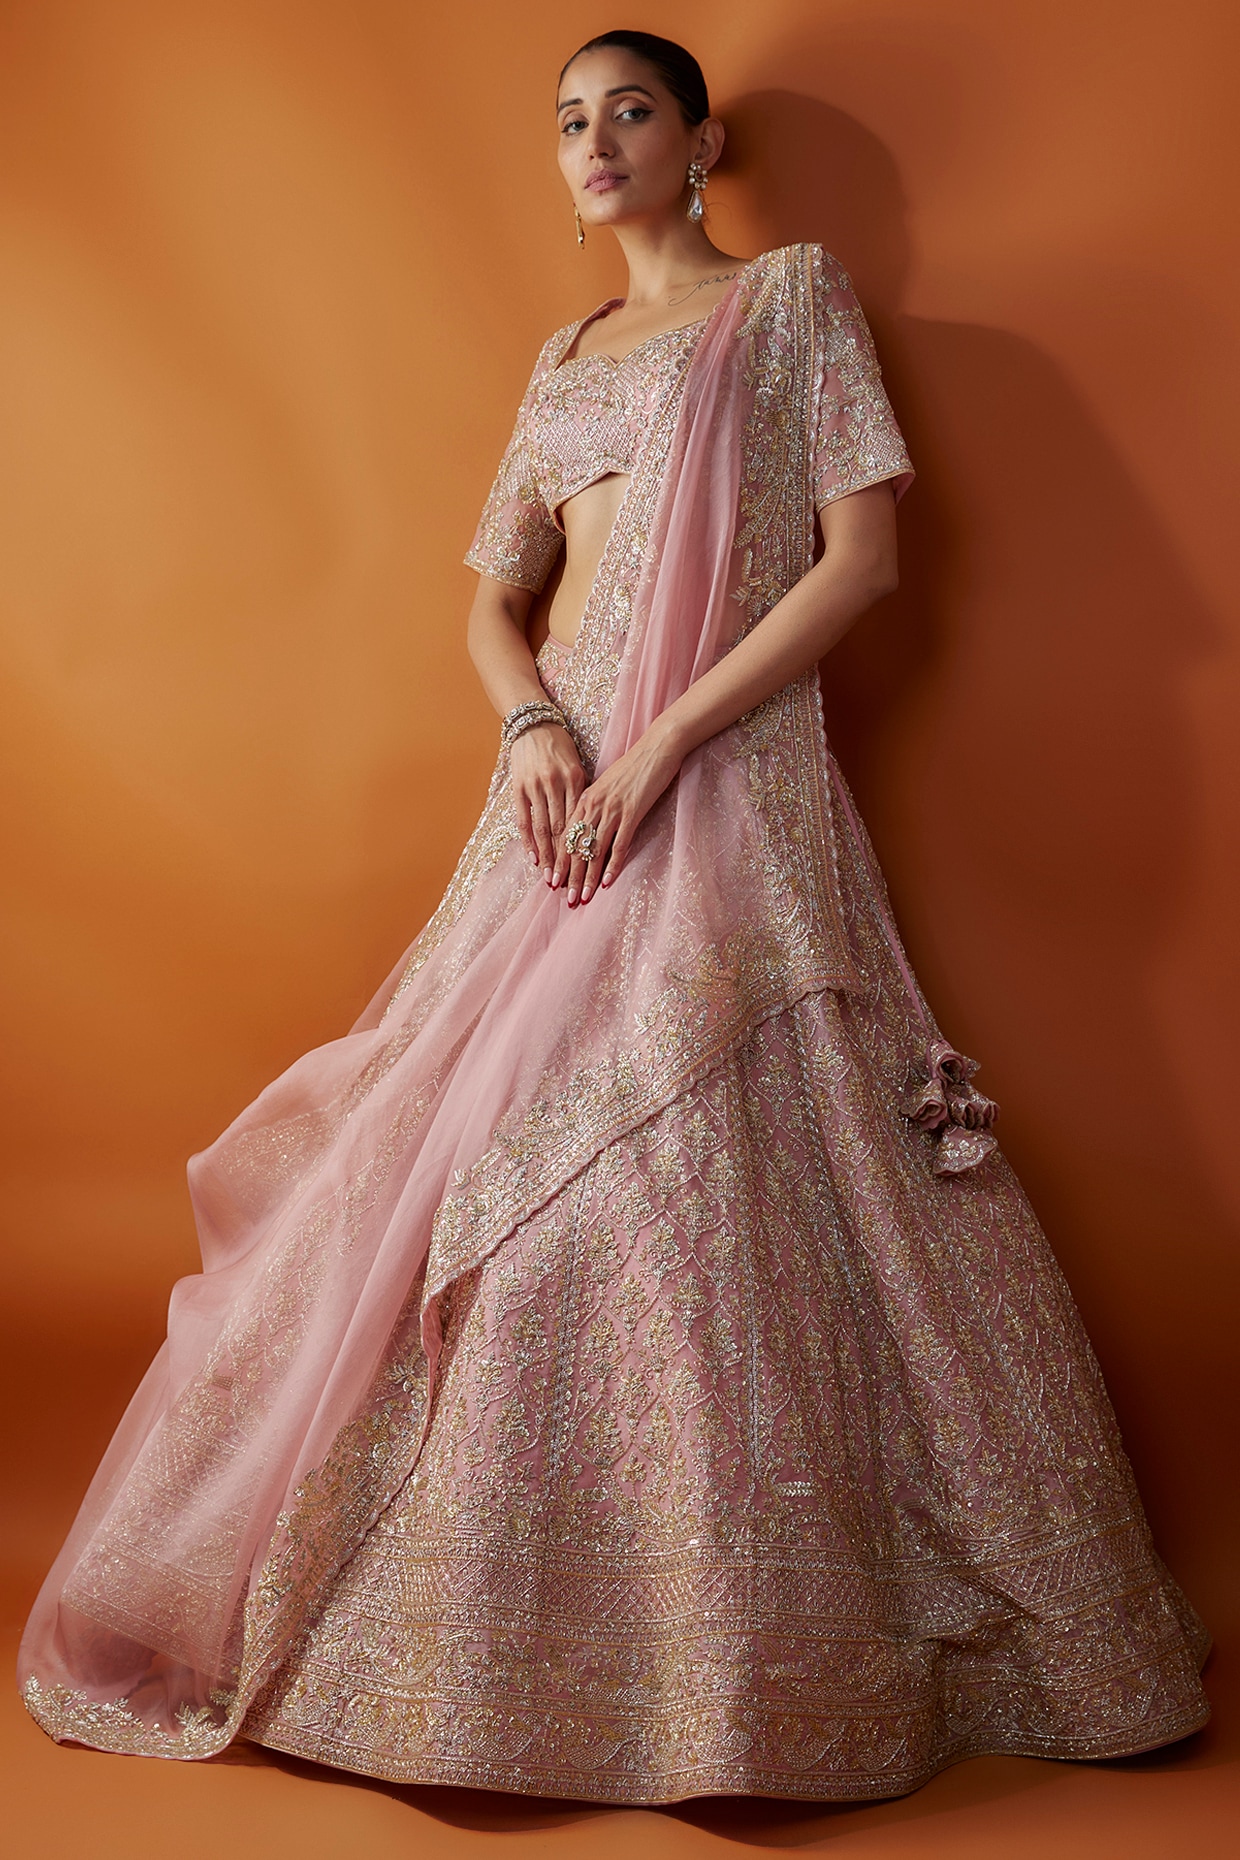 Buy Latest Party Wear Lehenga Choli Online at Best Prices